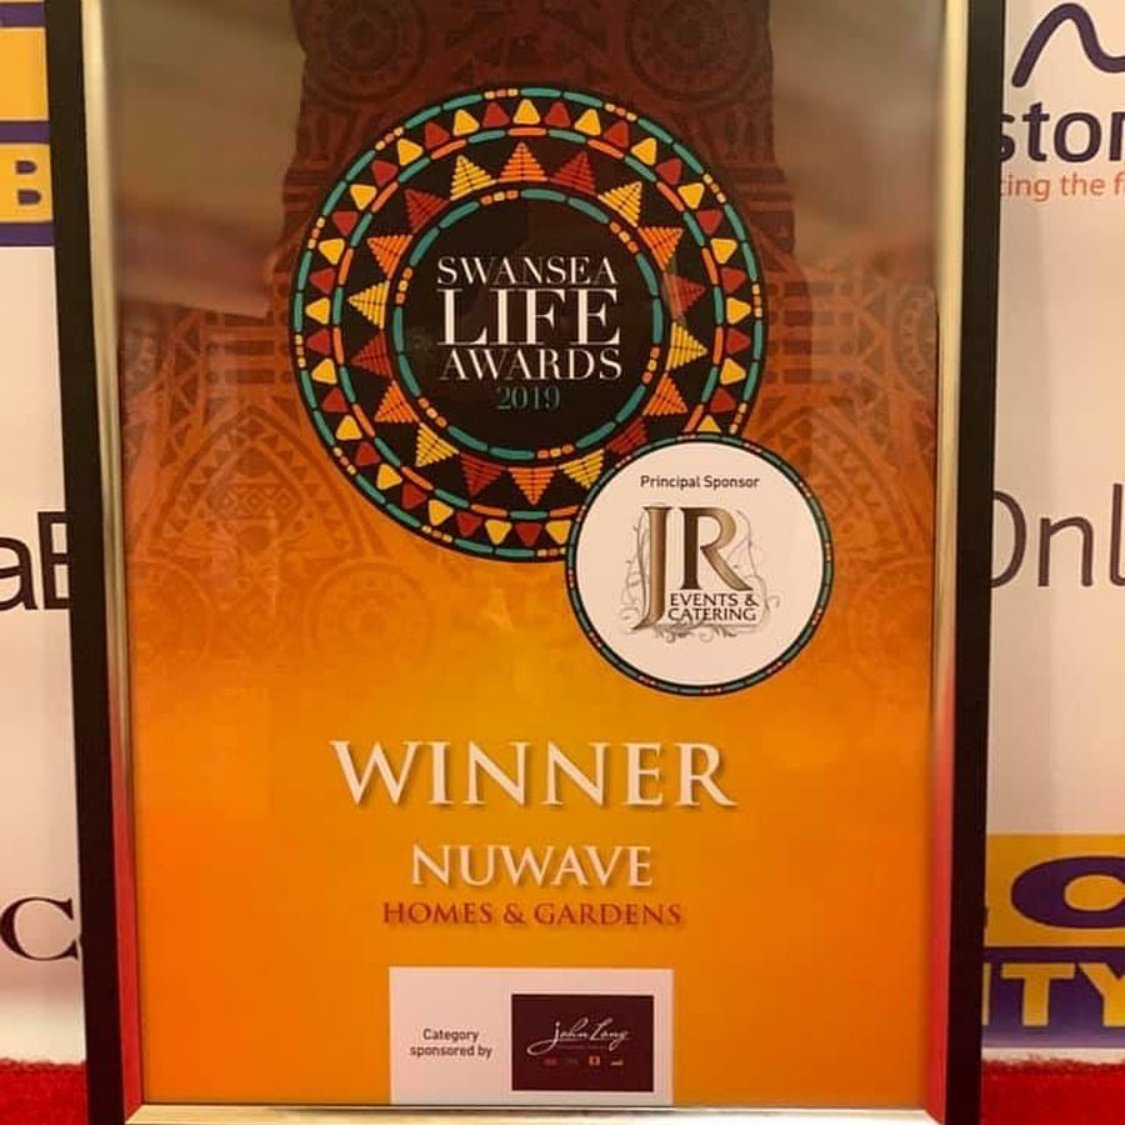 We’re delighted to have won Best in home and gardens at this years #SwanseaLifeAwards again... Massive thank you to everyone who voted and huge credit to everyone who works at Nuwave. #TeamEffort #TeamNuwave #AwardWinningBathrooms #BathroomGoals @Fibo_UK #Specialists